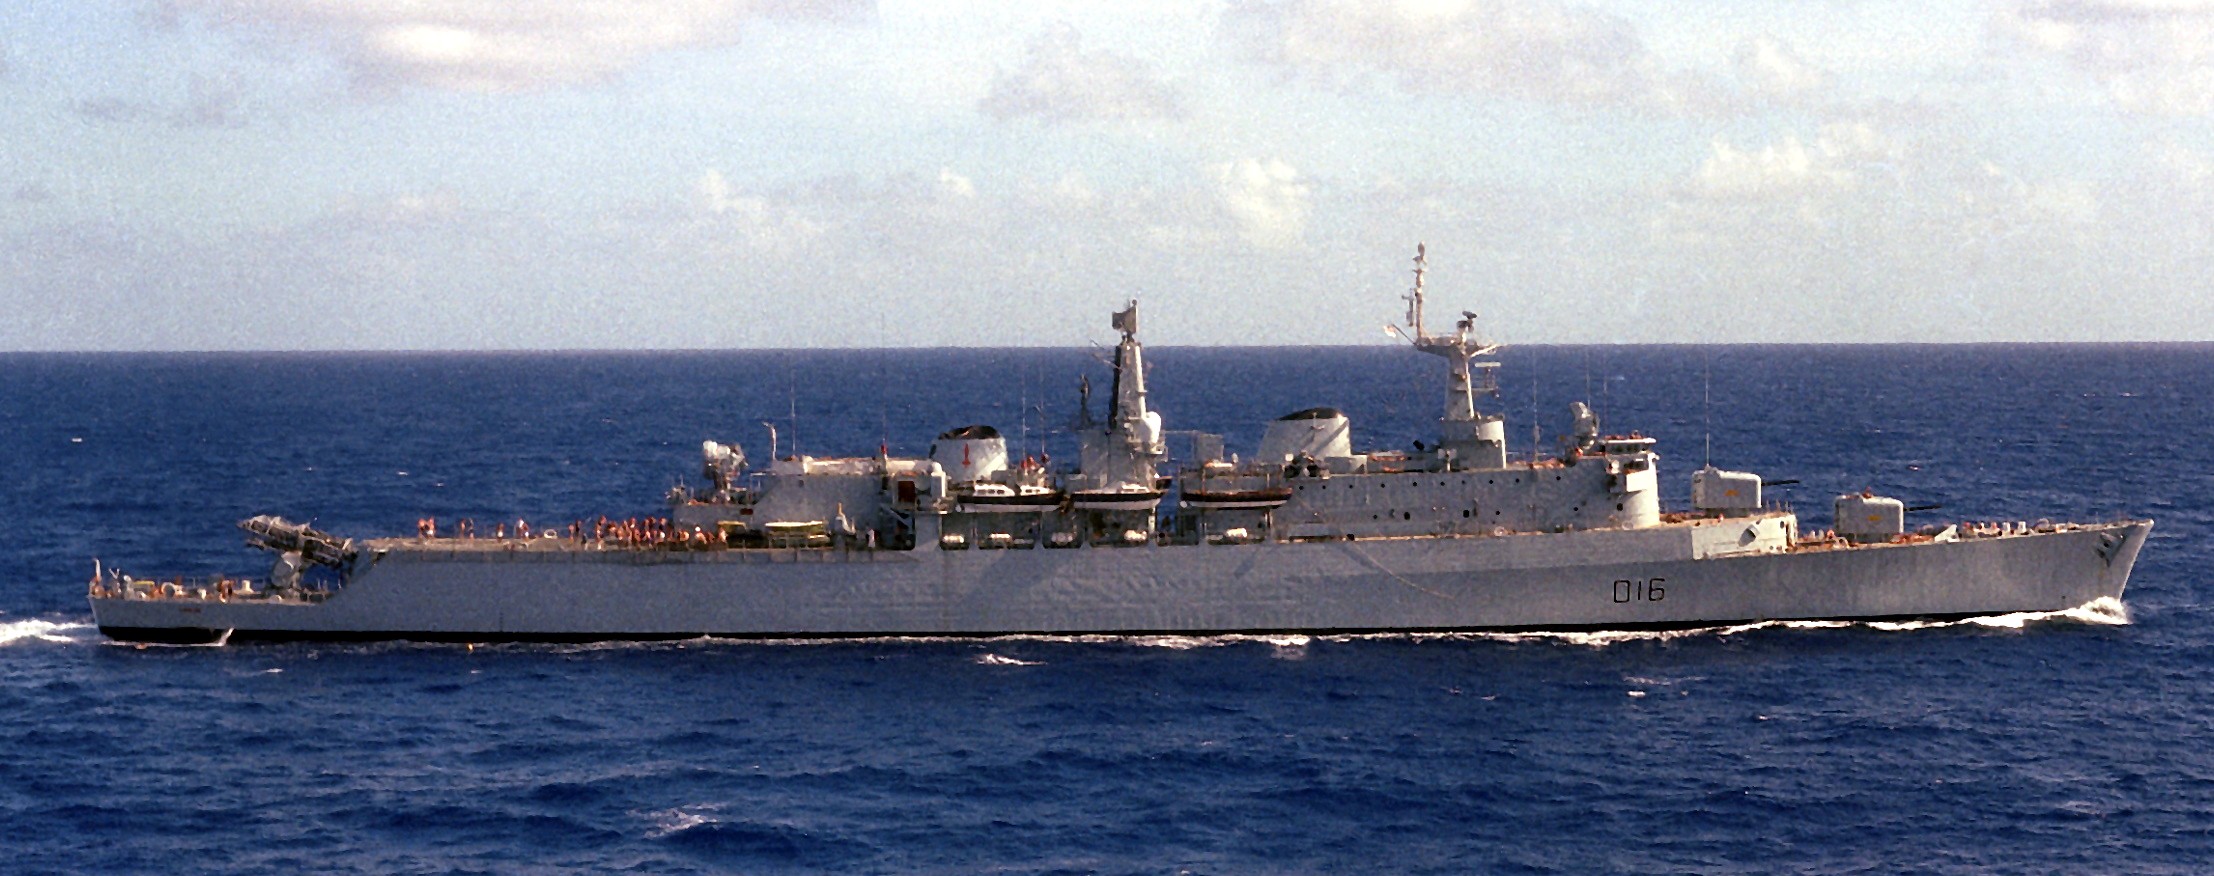 d 16 hms london county class guided missile destroyer royal navy